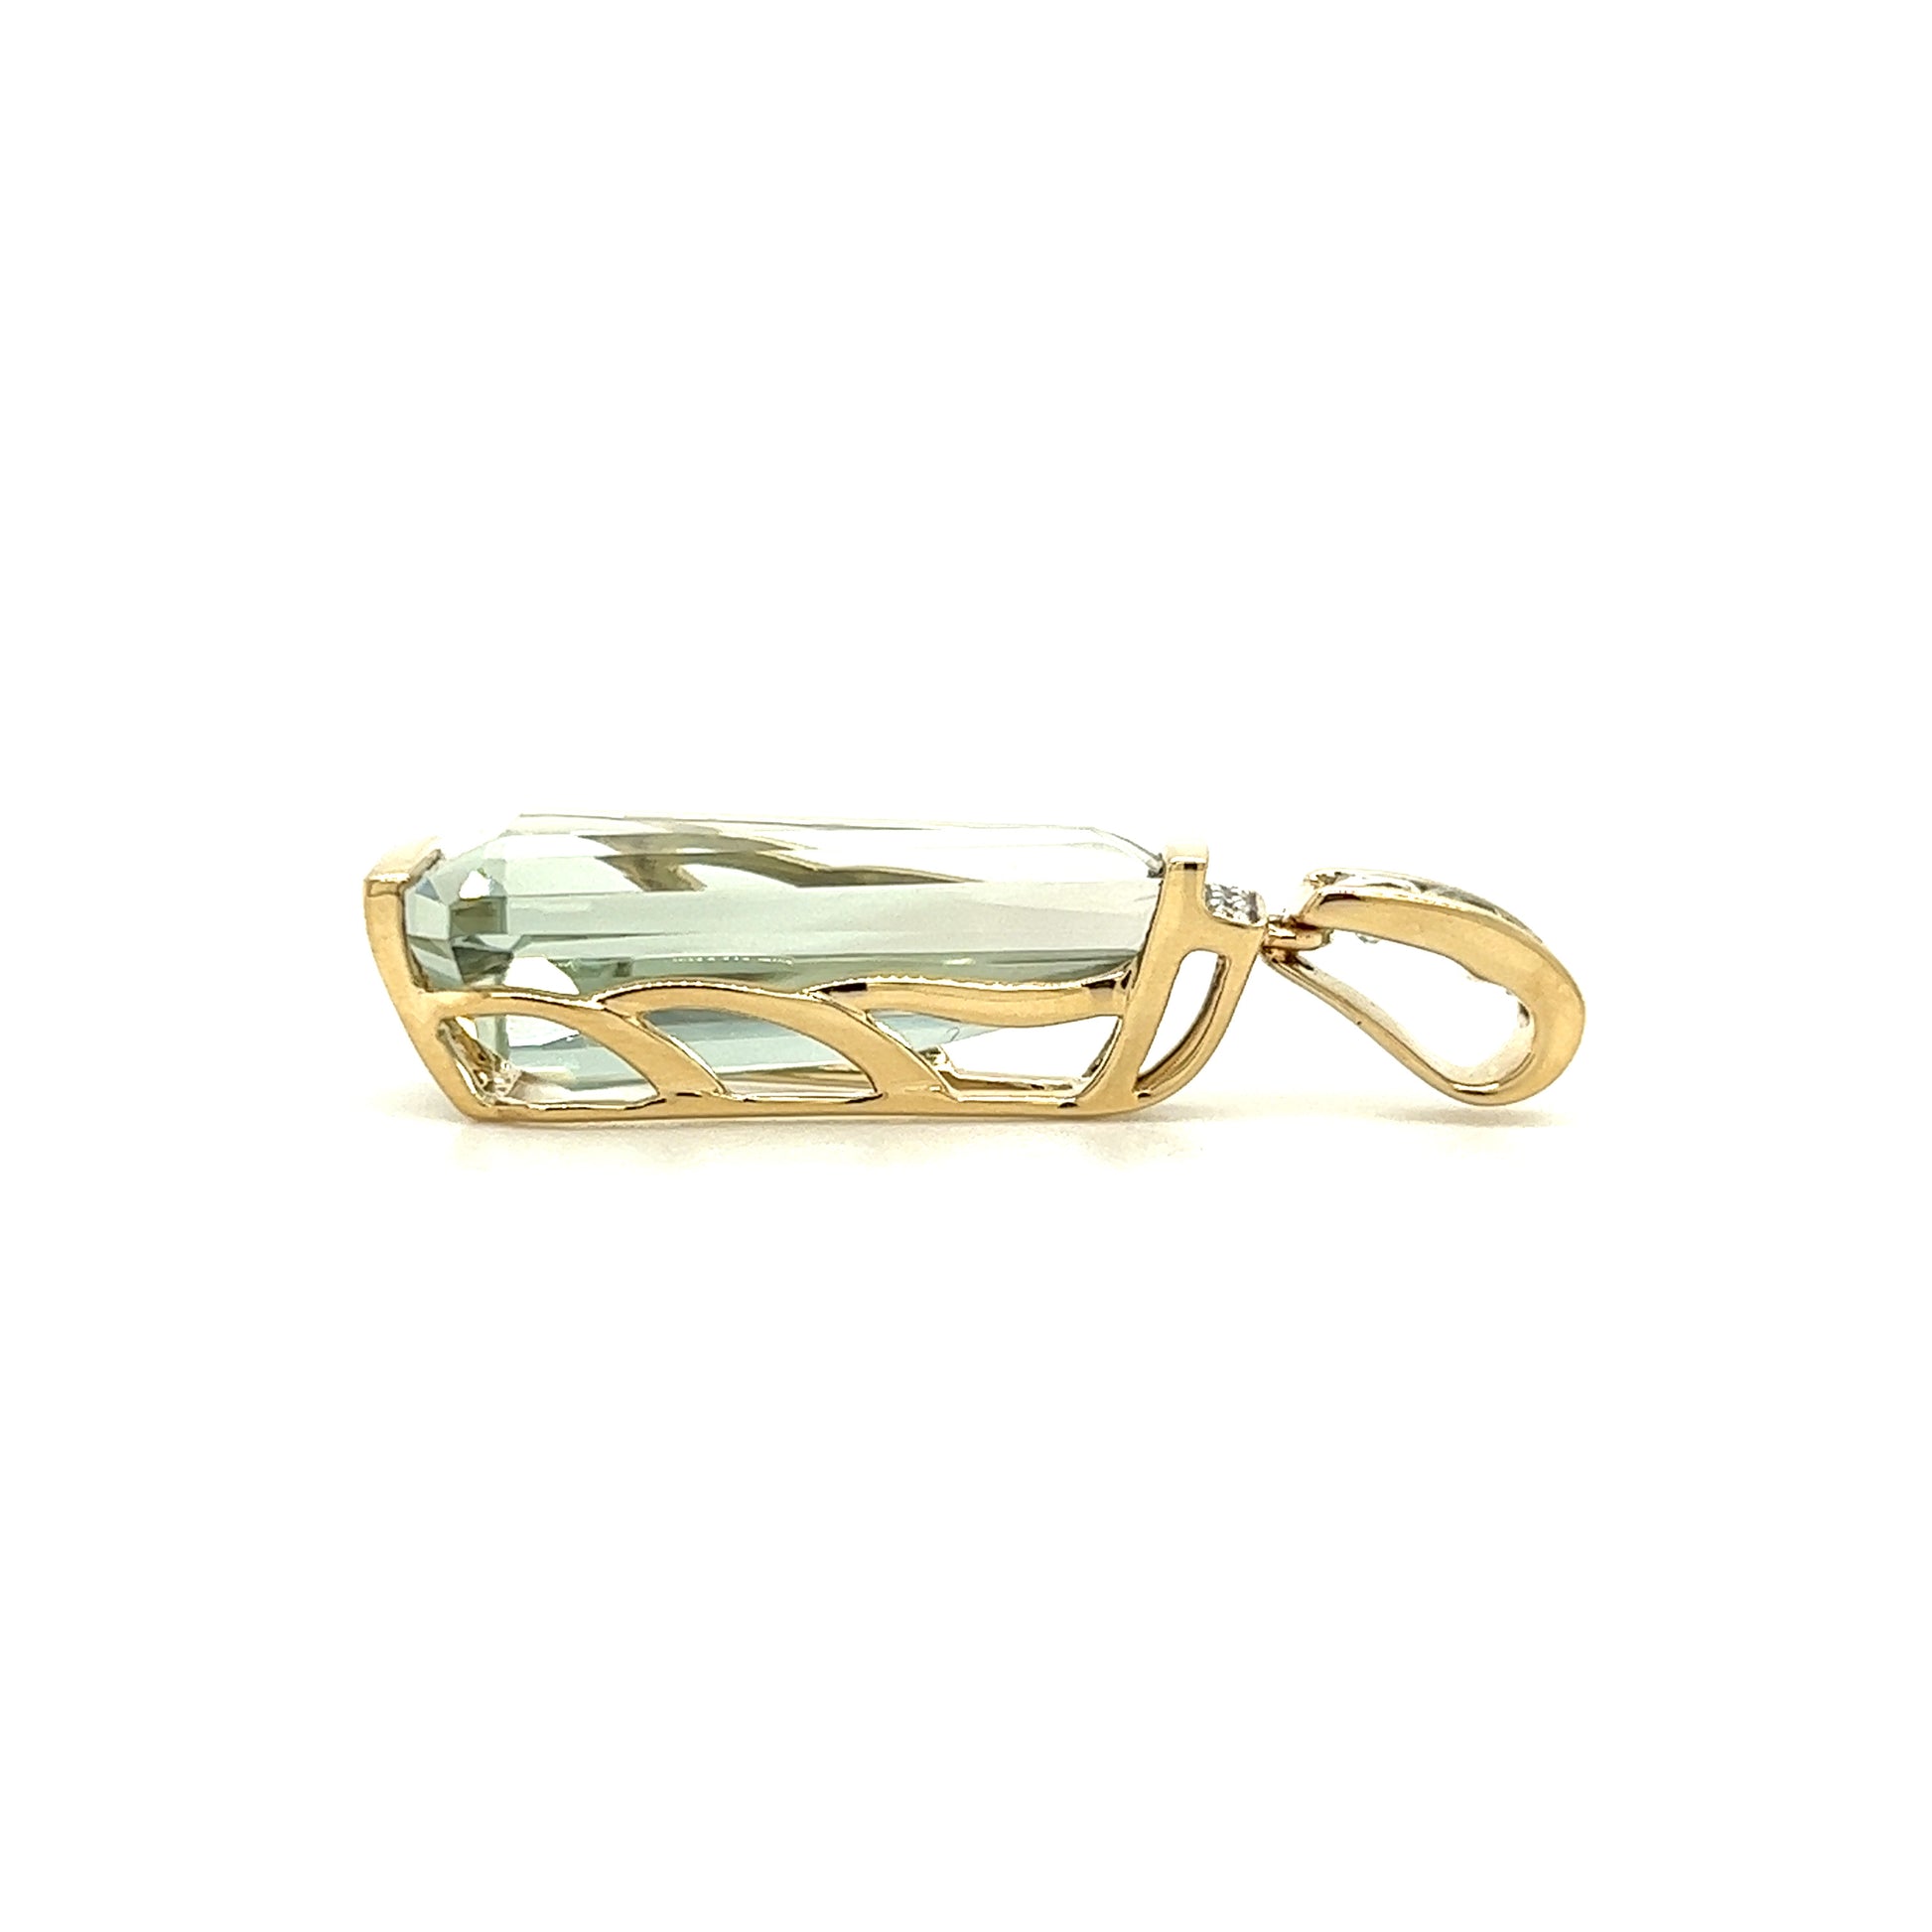 Green Amethyst Pendant with Blue Topaz and Diamonds in 14K Yellow Gold Pendant Flat Side View